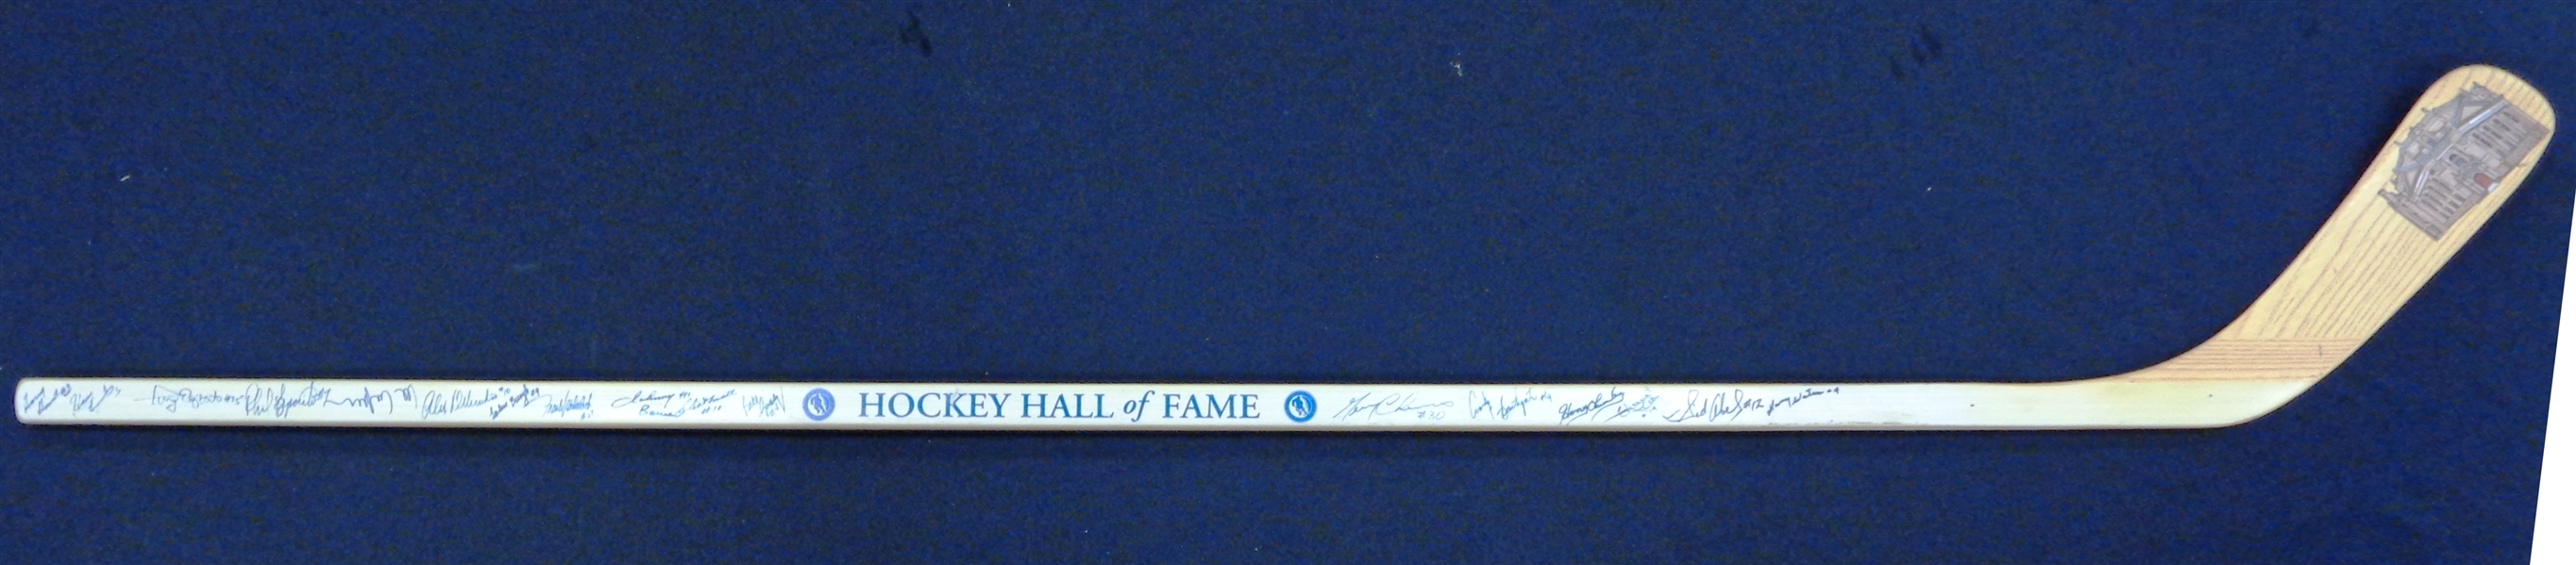 Hockey Hall of Fame Stick Signed by 32 Members